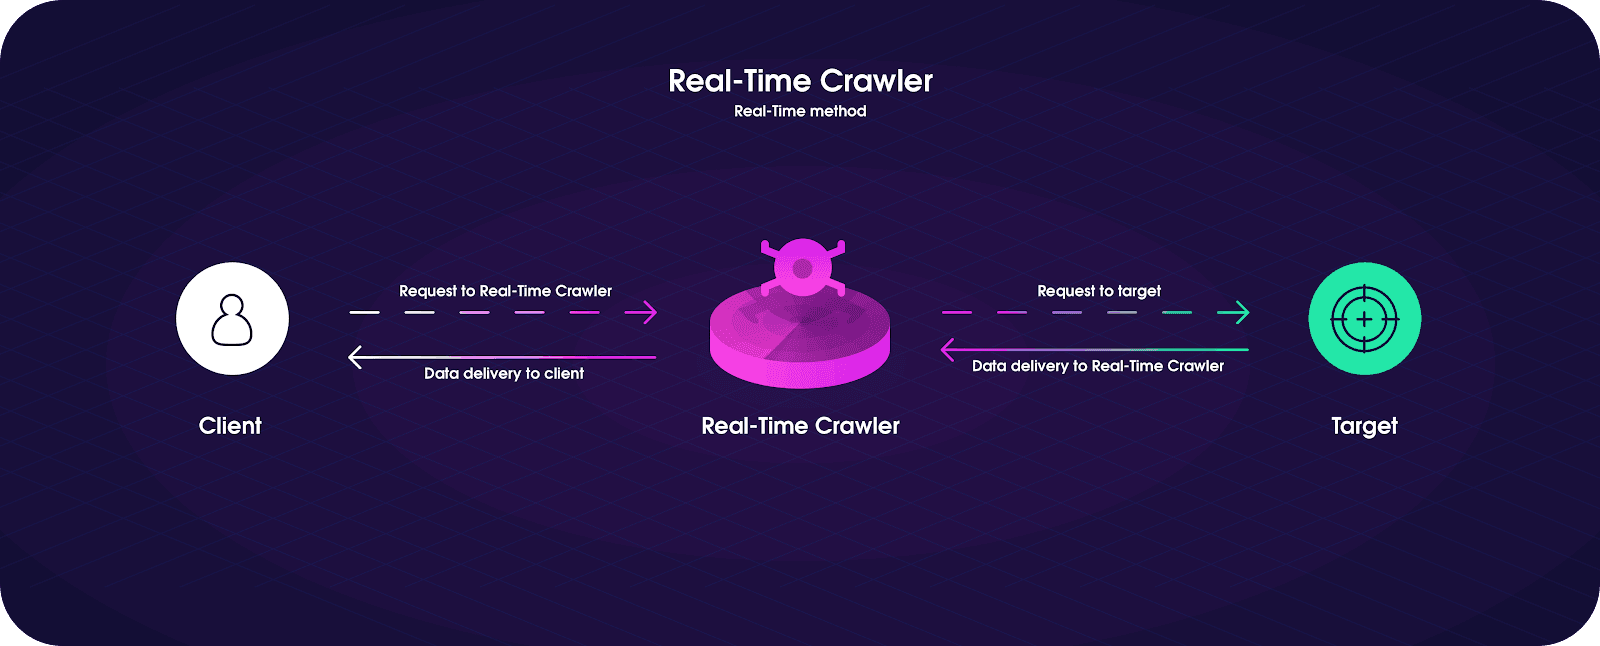 Real-Time Crawler delivers ready-to-use data from your target website